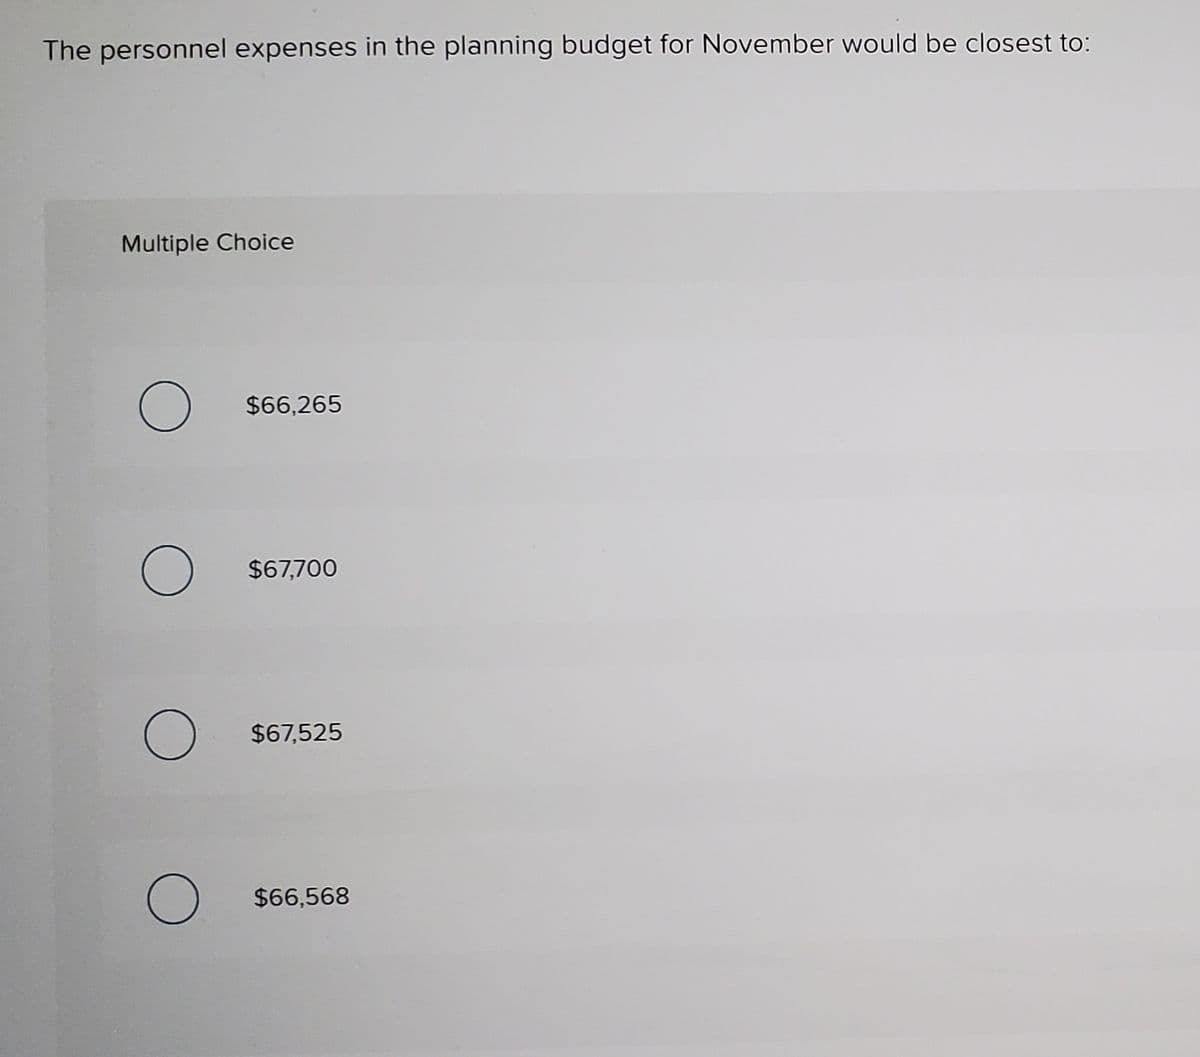 The personnel expenses in the planning budget for November would be closest to:
Multiple Choice
$66,265
$67,700
$67,525
$66,568
